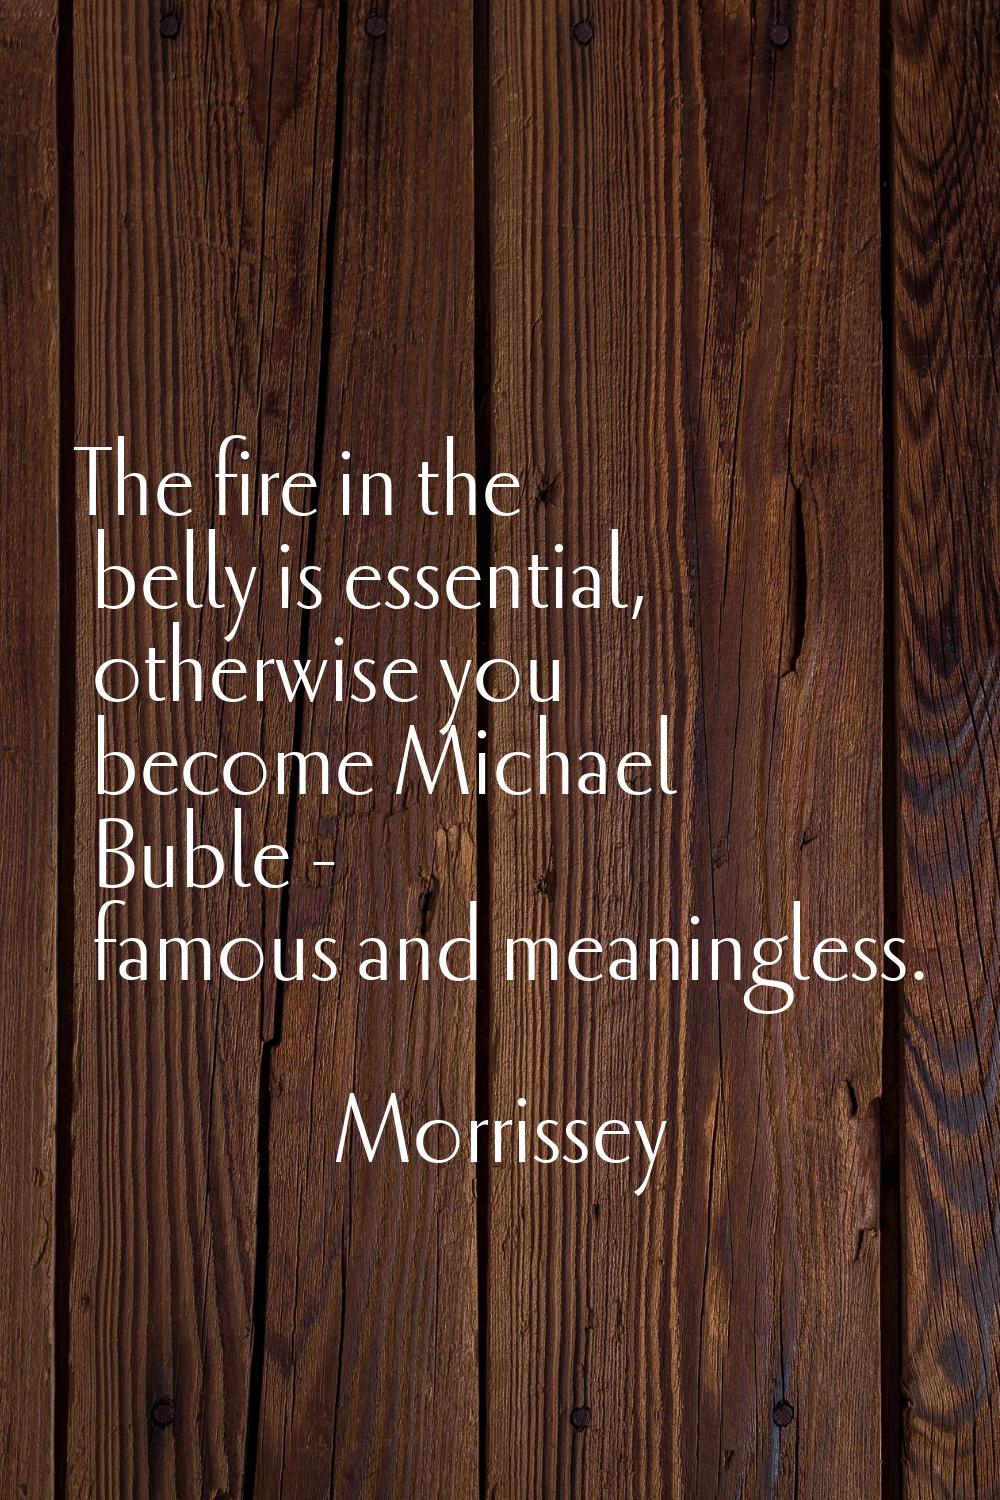 The fire in the belly is essential, otherwise you become Michael Buble - famous and meaningless.